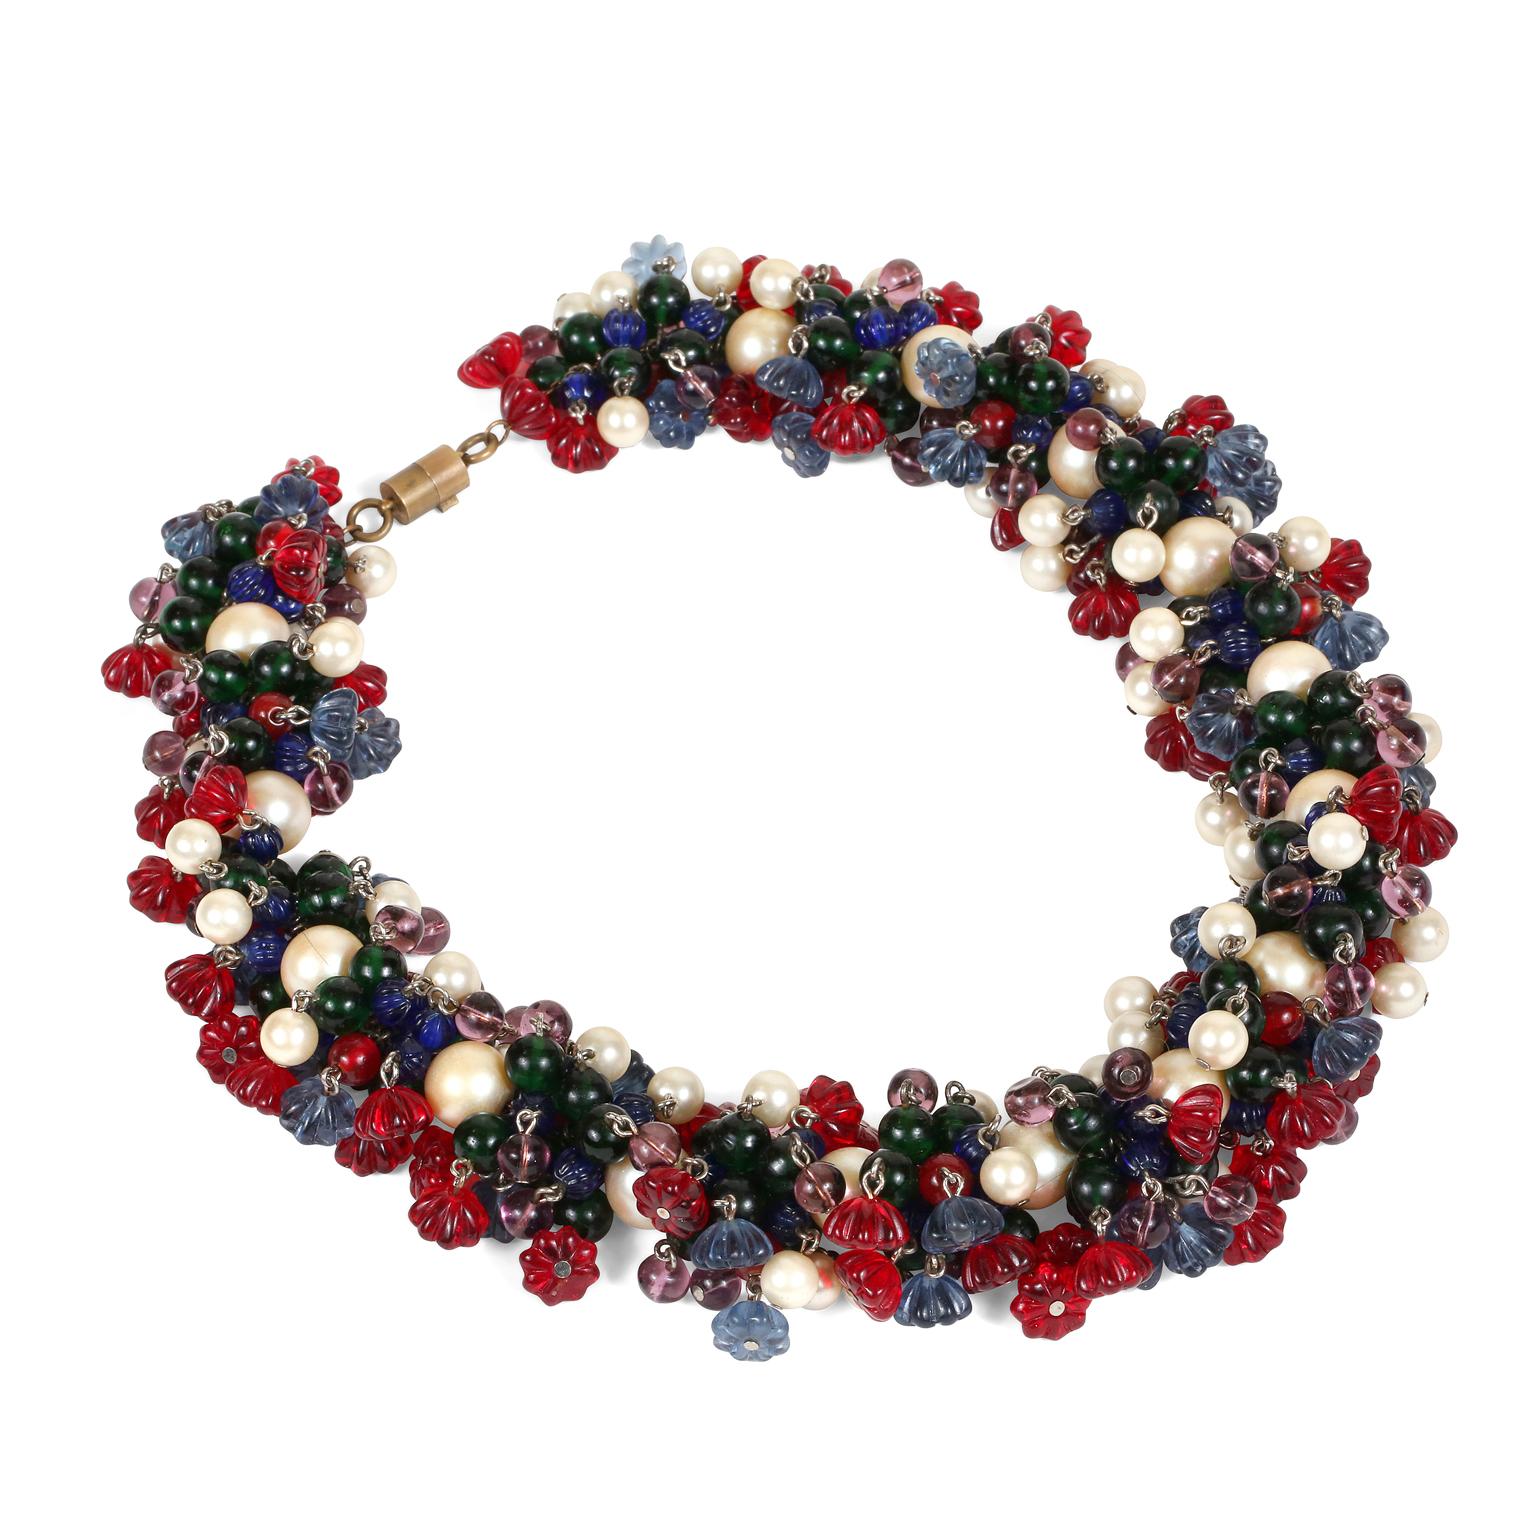 This authentic Chanel Gripoix and Pearl Tutti Frutti Necklace is in exceptionally good early vintage condition.  Red, blue, green and purple Gripoix glass beads and flowers are clustered together in this stunning necklace.  Interspersed with faux